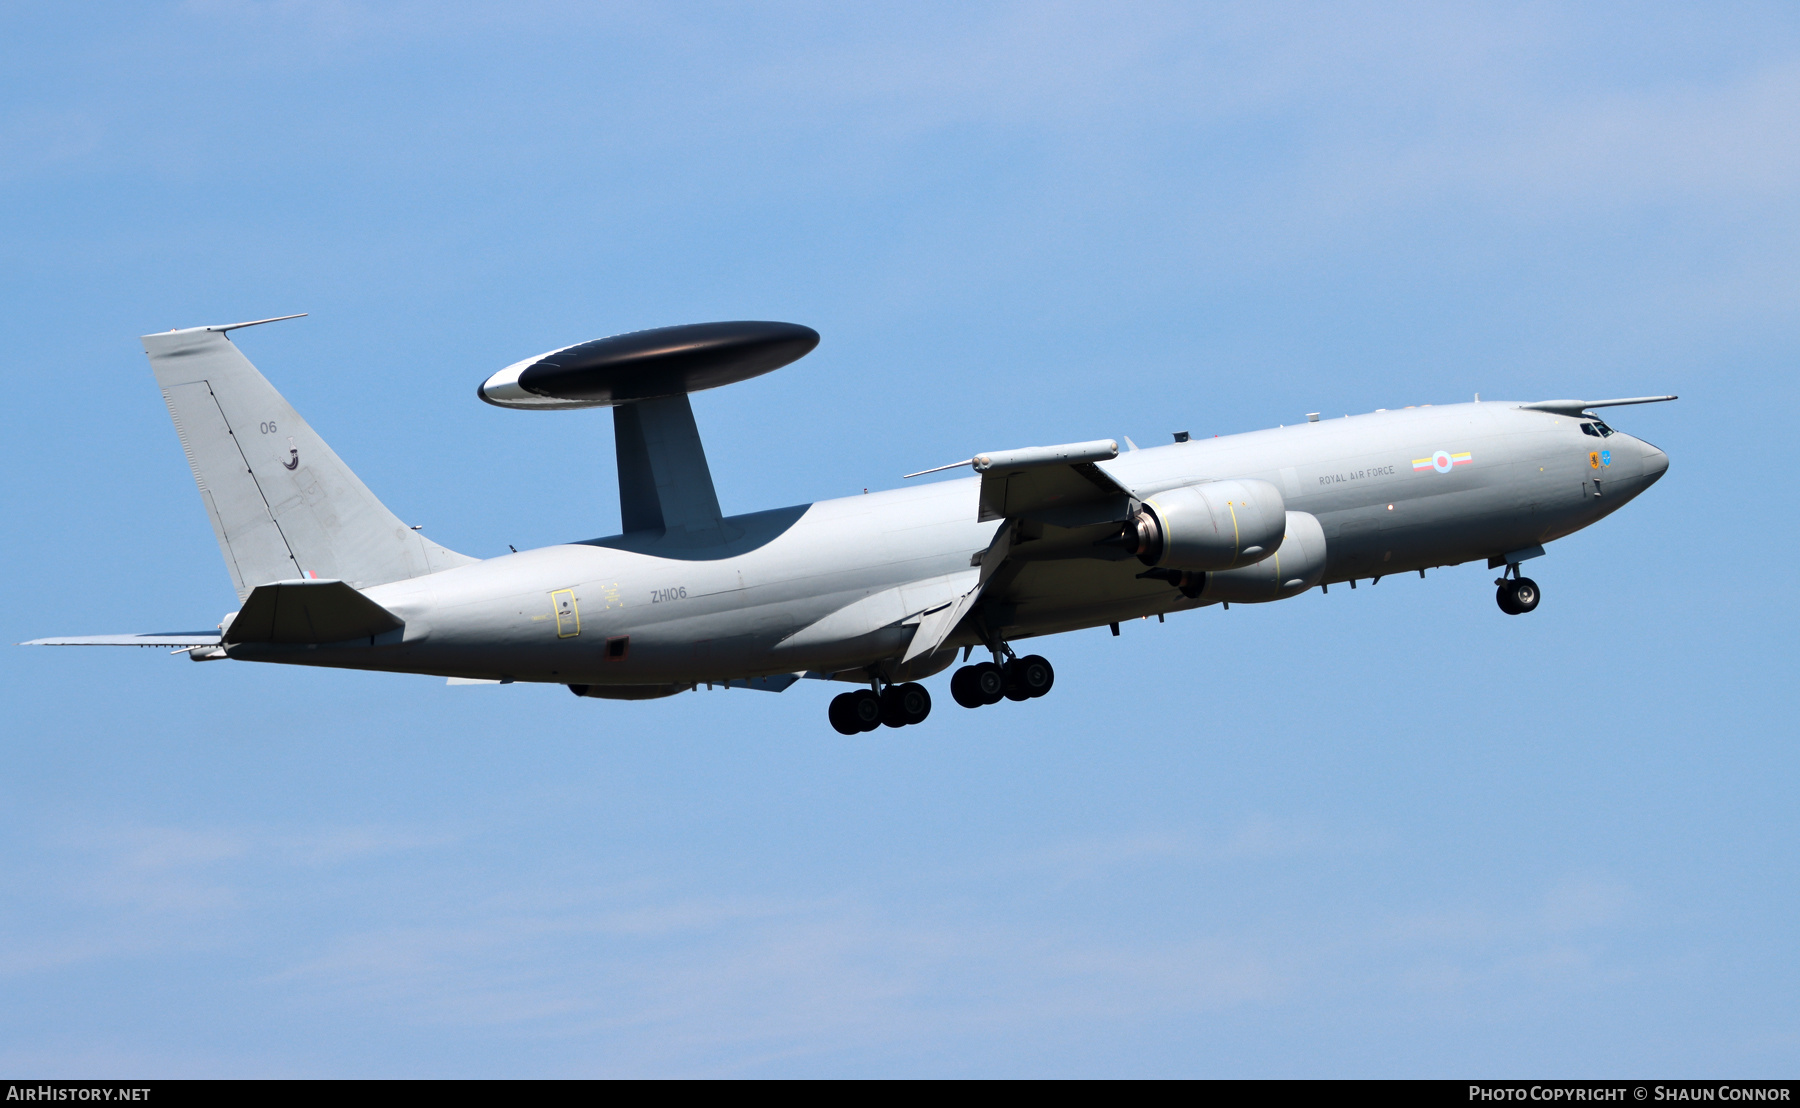 Aircraft Photo Of Zh106 Boeing E 3d Sentry Aew1 707 300 Uk Air Force Airhistory Net